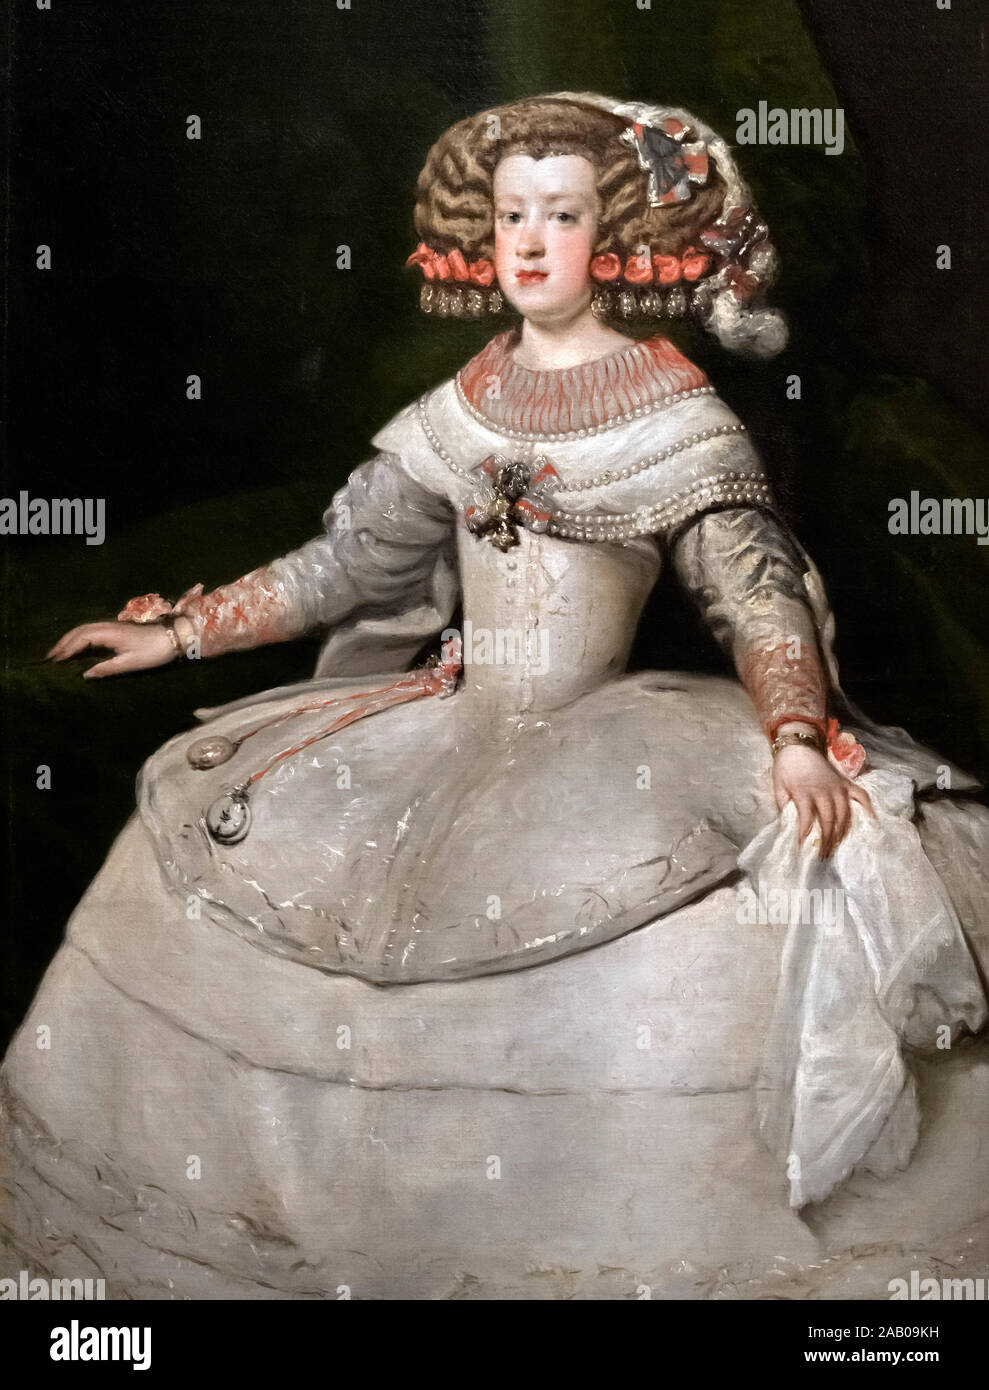 Infanta Maria Theresa by workshop of Diego Velazquez, oil on canvas, 1653 Stock Photo